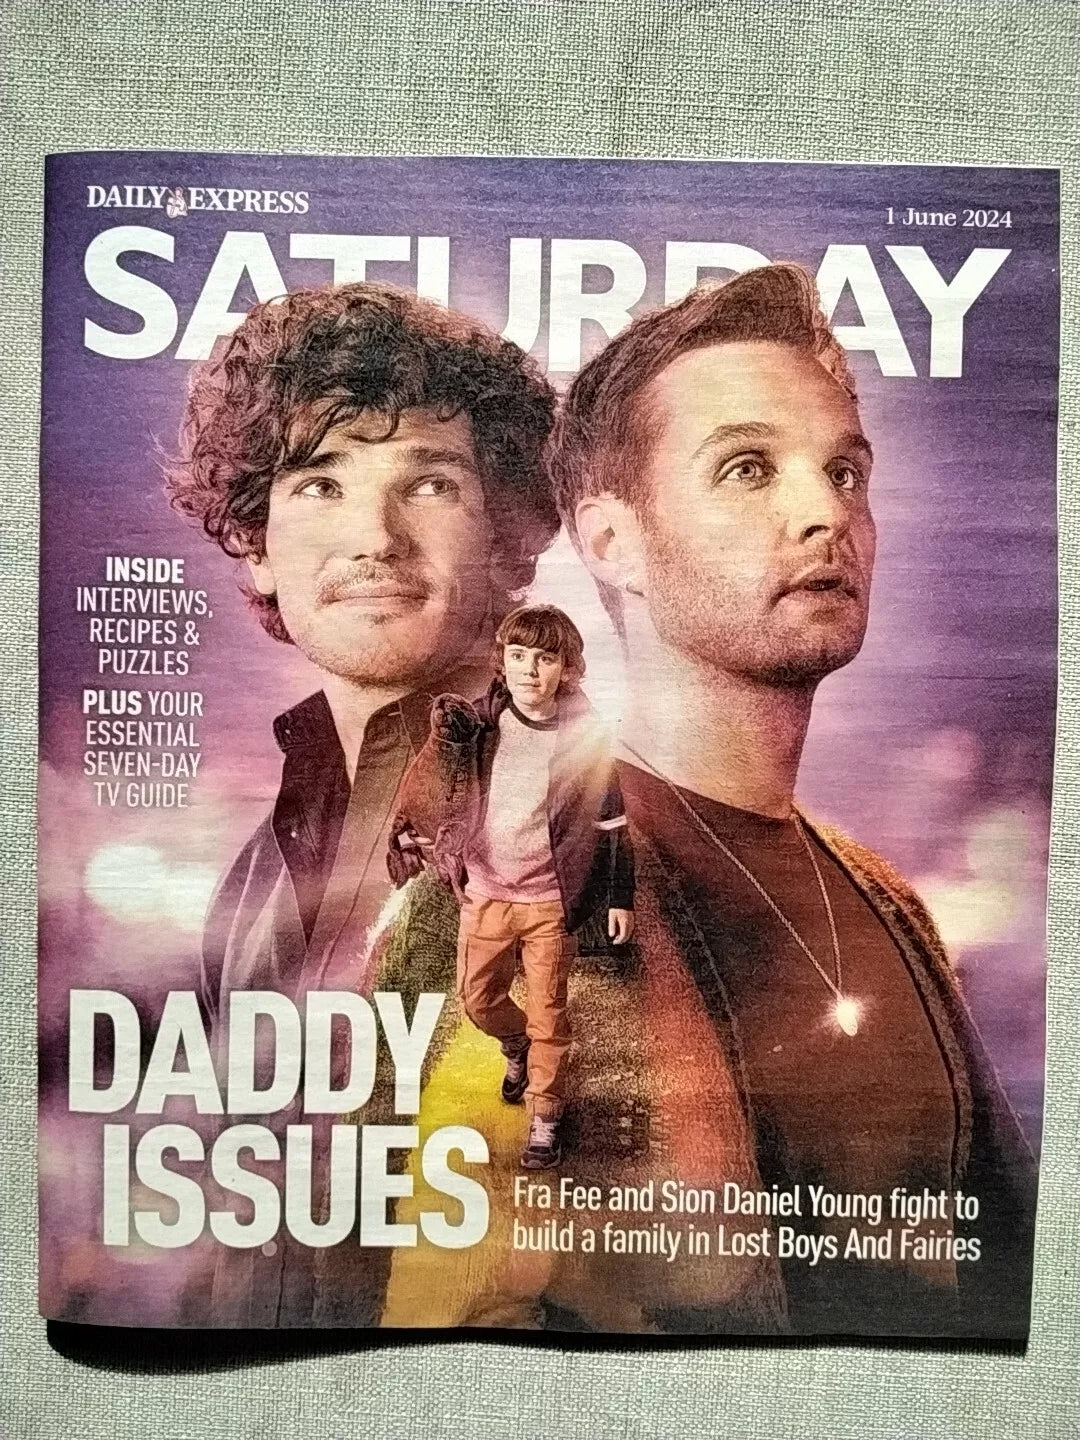 Saturday Express magazine 1st June 2024 Lost Boys and Fairies Reece Shearsmith